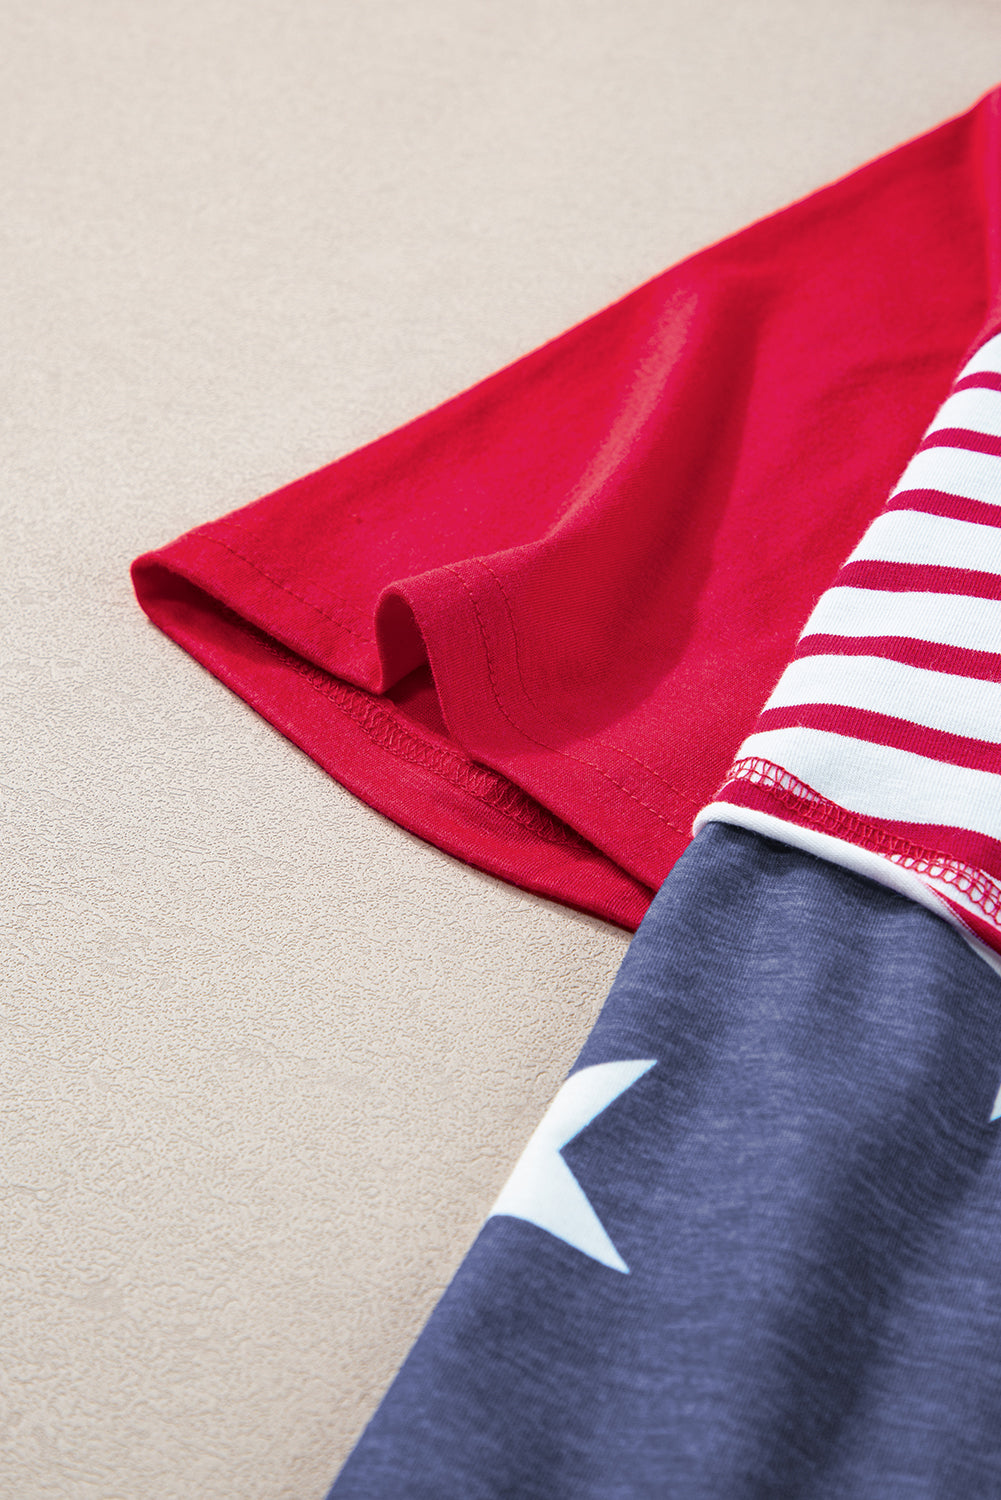 Stars and Stripes Hooded Tee